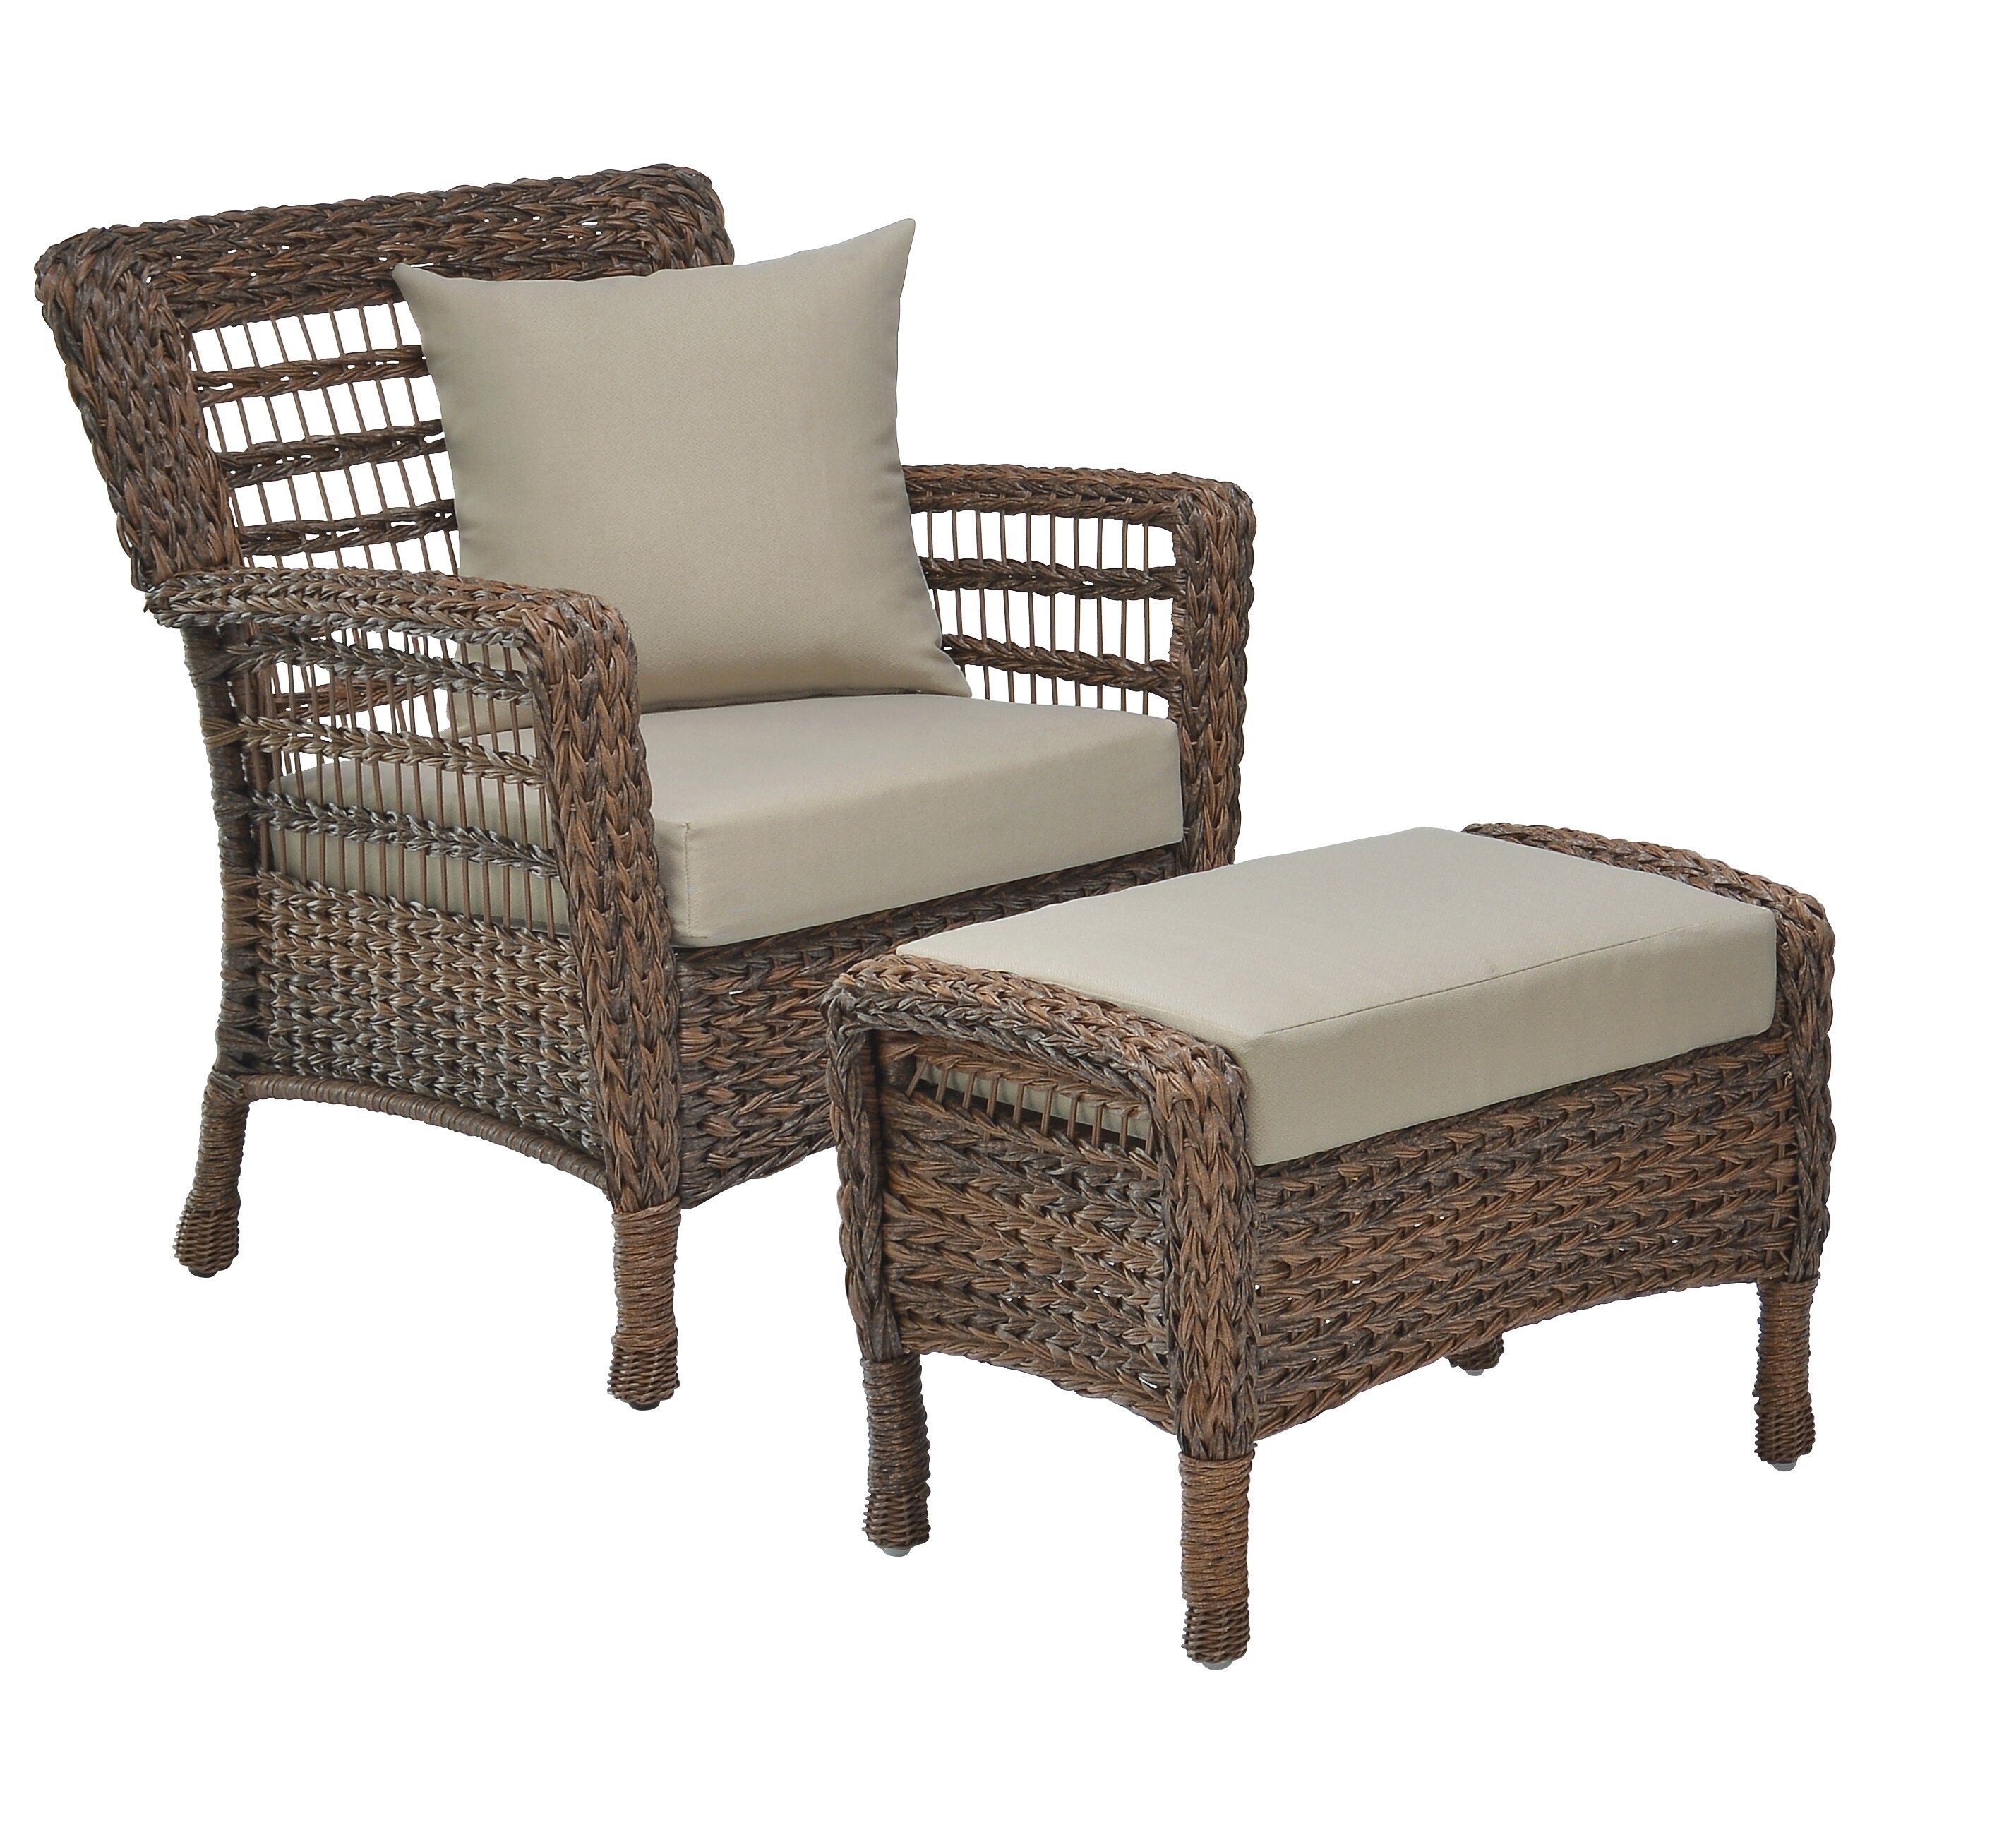 Outdoor Chairs With Ottoman – Visualhunt In Brown Wicker Chairs With Ottoman (View 15 of 15)